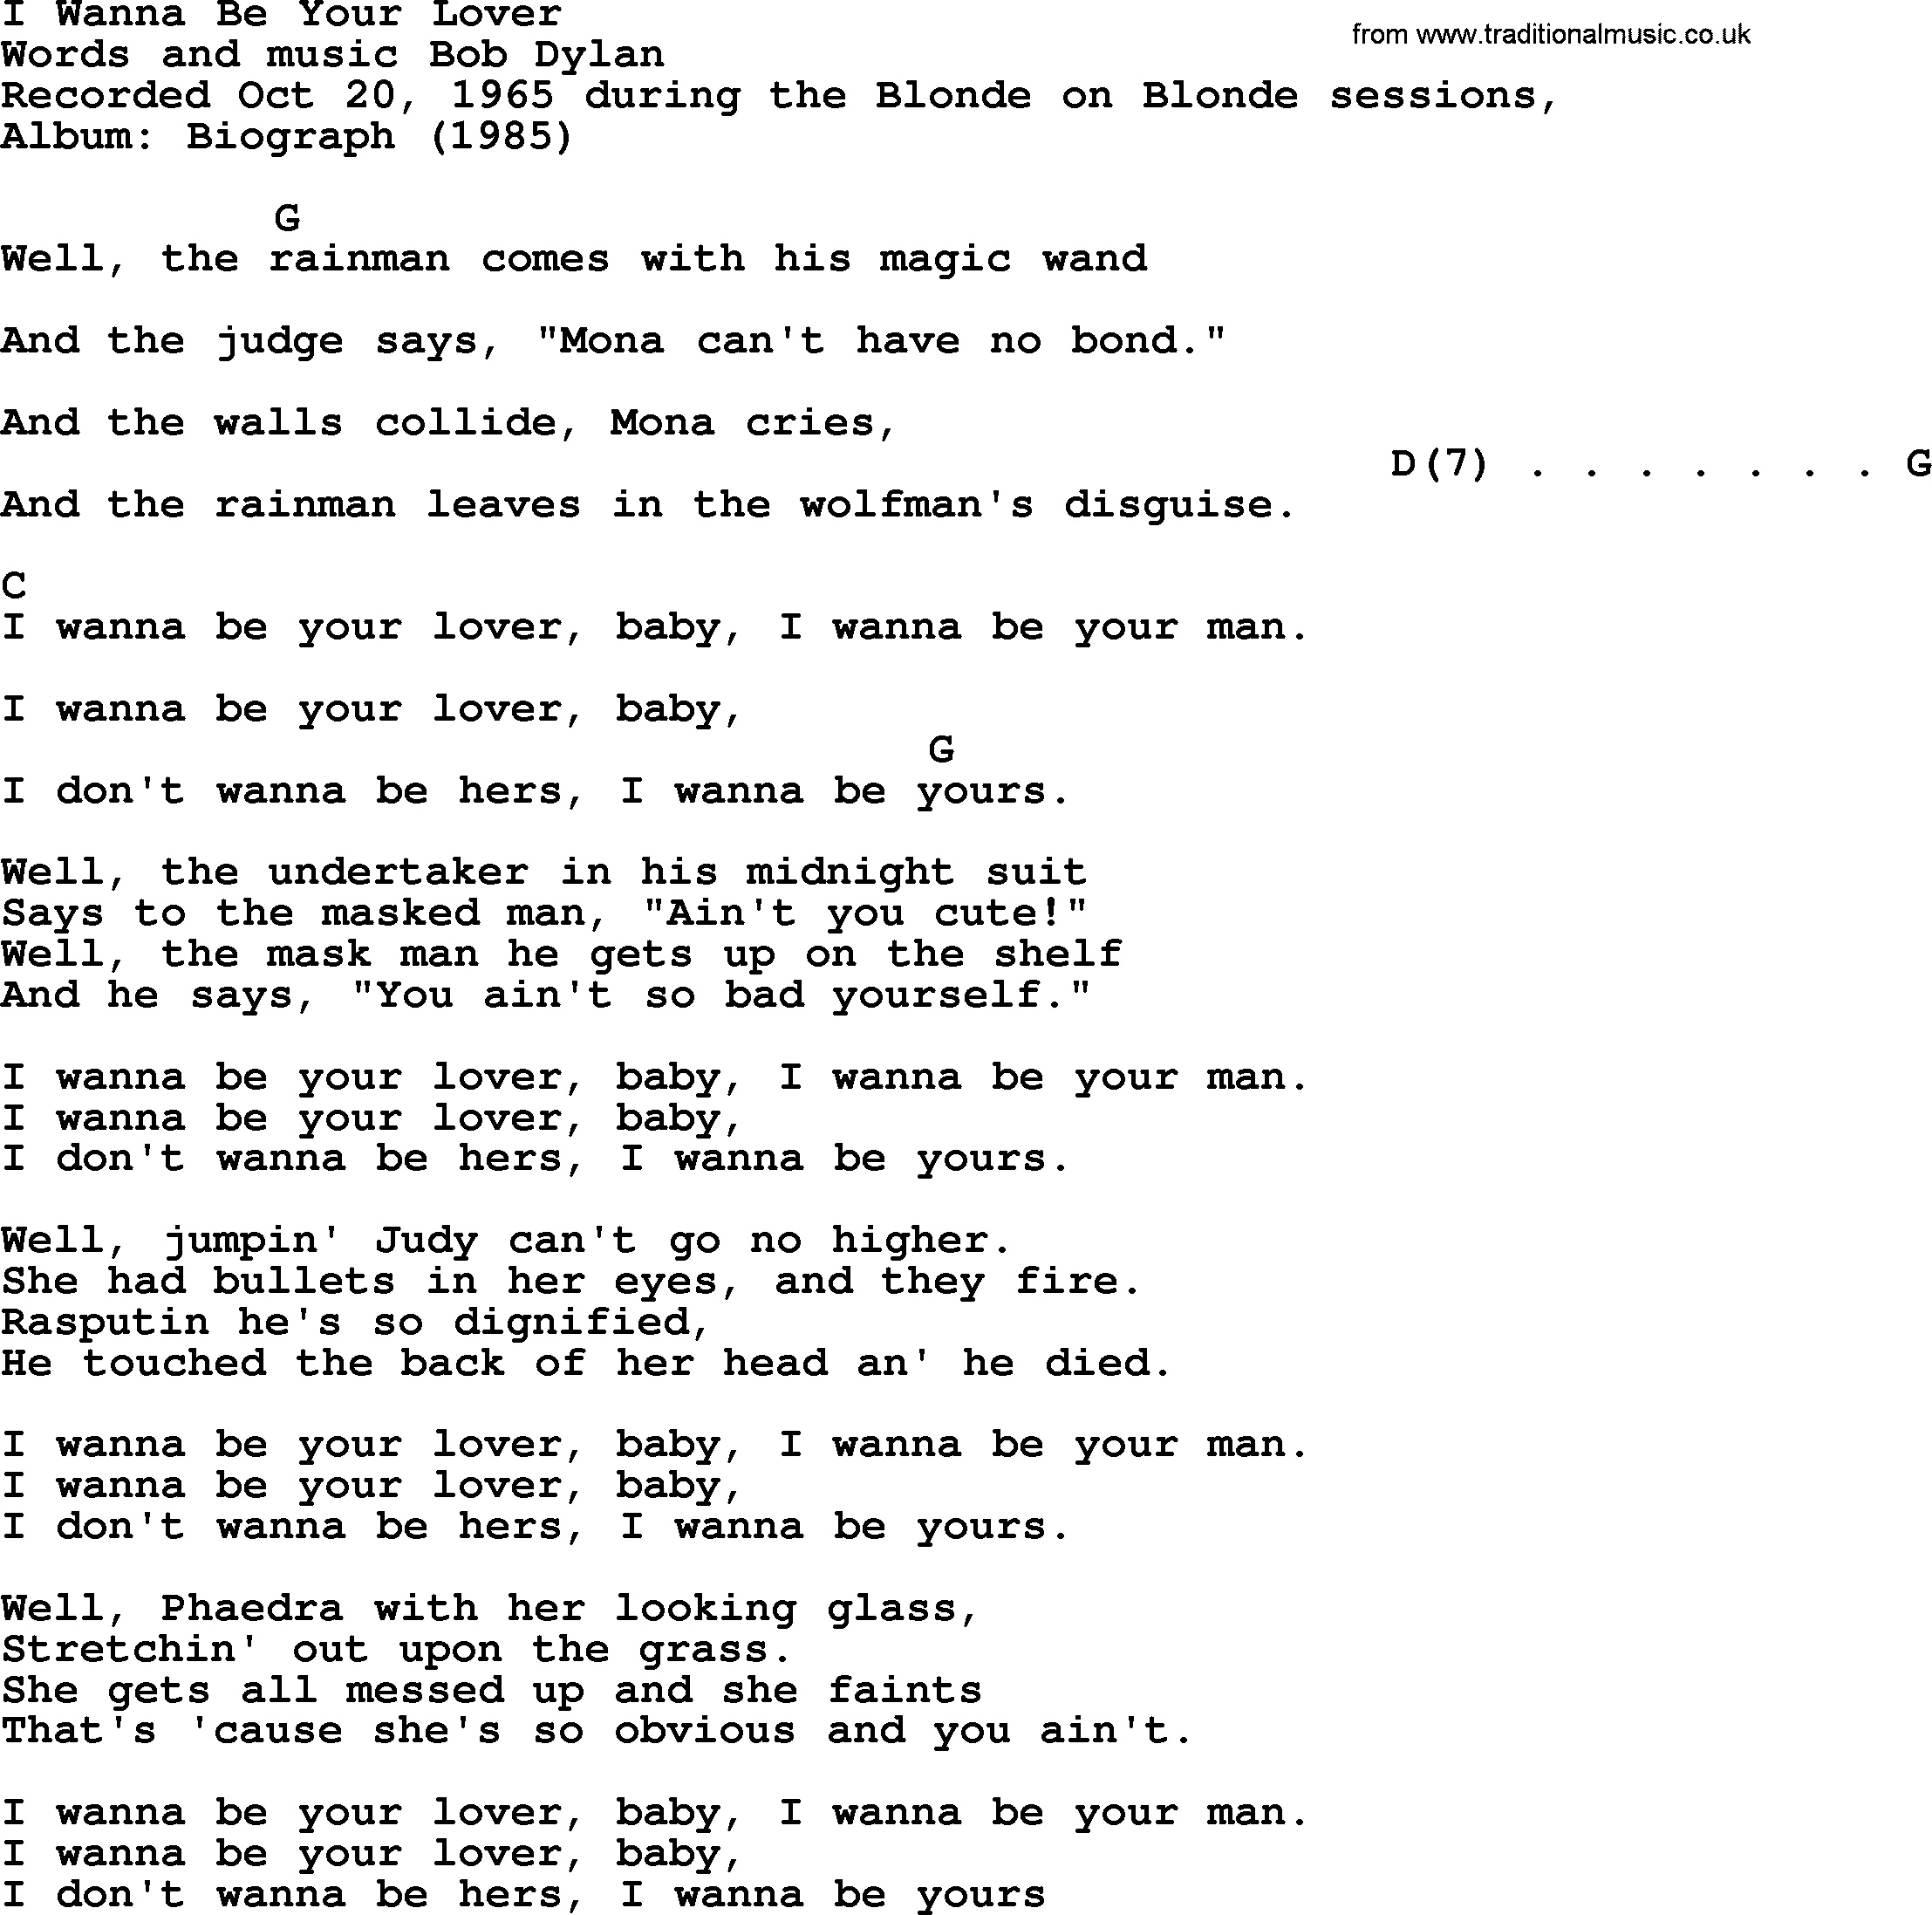 Bob Dylan song, lyrics with chords - I Wanna Be Your Lover